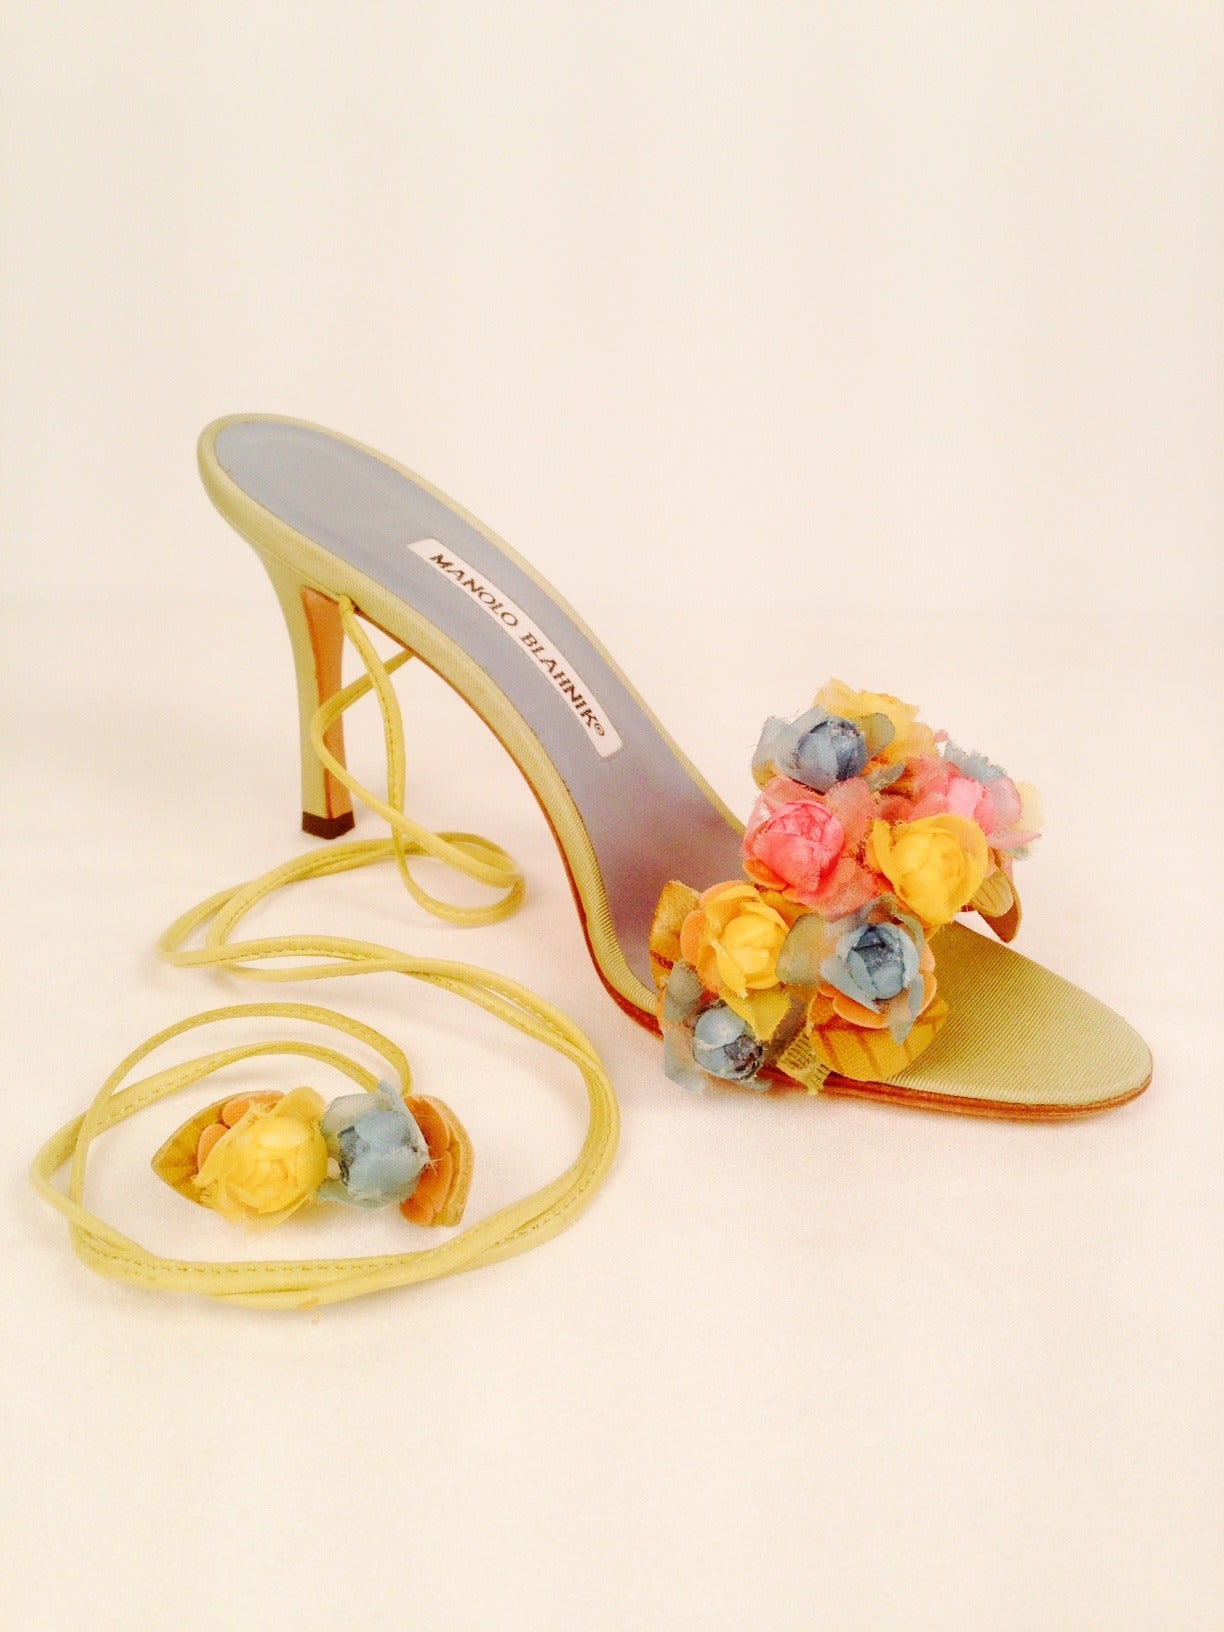 Sold out at Neiman Marcus at $830 per pair, these Manolo Blahnik Liseux Flower Ankle Tie Sandals will leave an unforgettable impression at tea!  New and never worn outside, ours are priced to sell!  Features chamomile silk twill and leather.  The